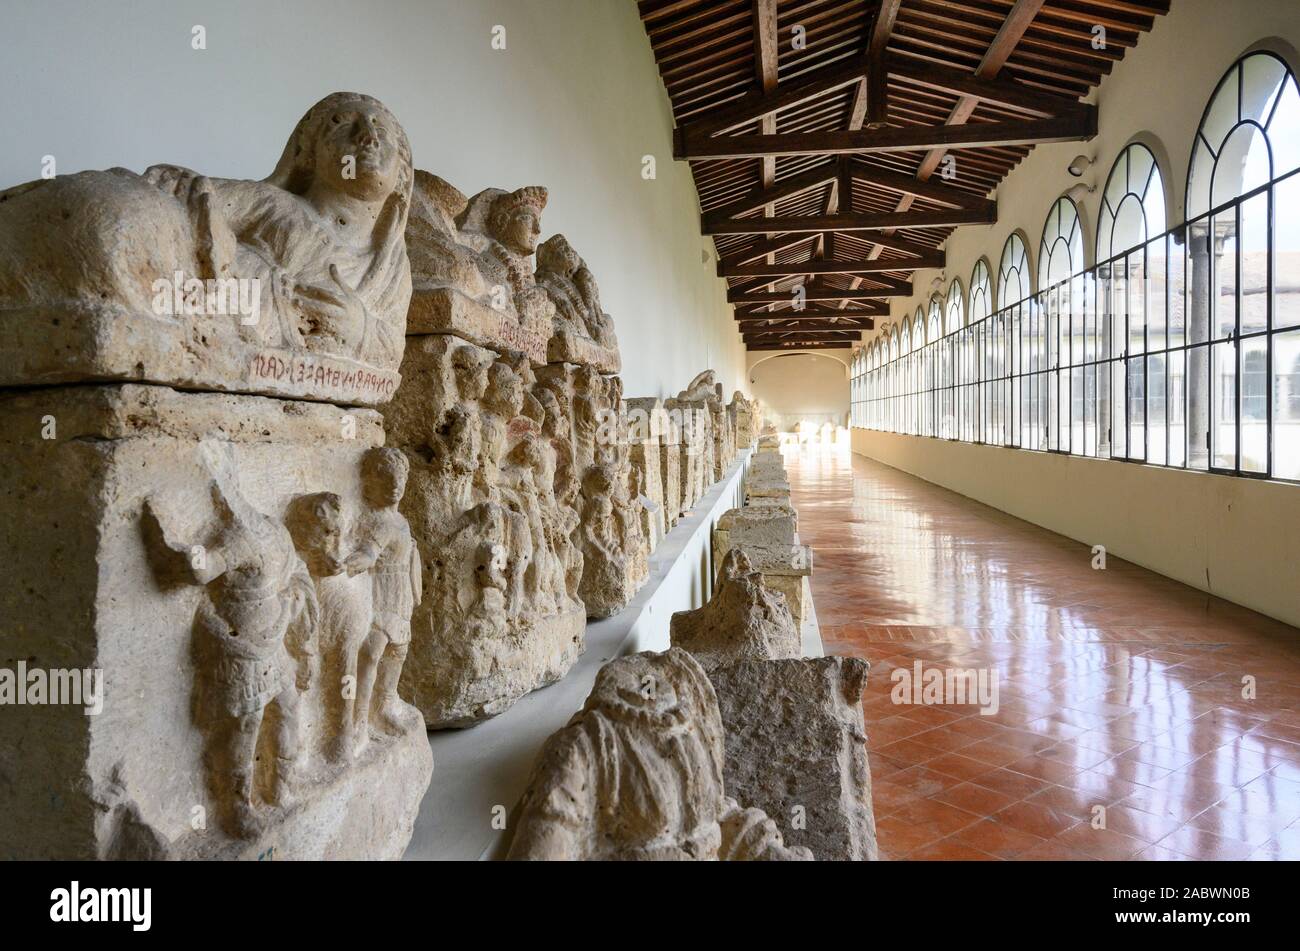 Perugia. Italy. Etruscan cinerary urns at the Museo Archeologico Nazionale dell' Umbria (MANU - National Archaeological Museum of Umbria). Stock Photo